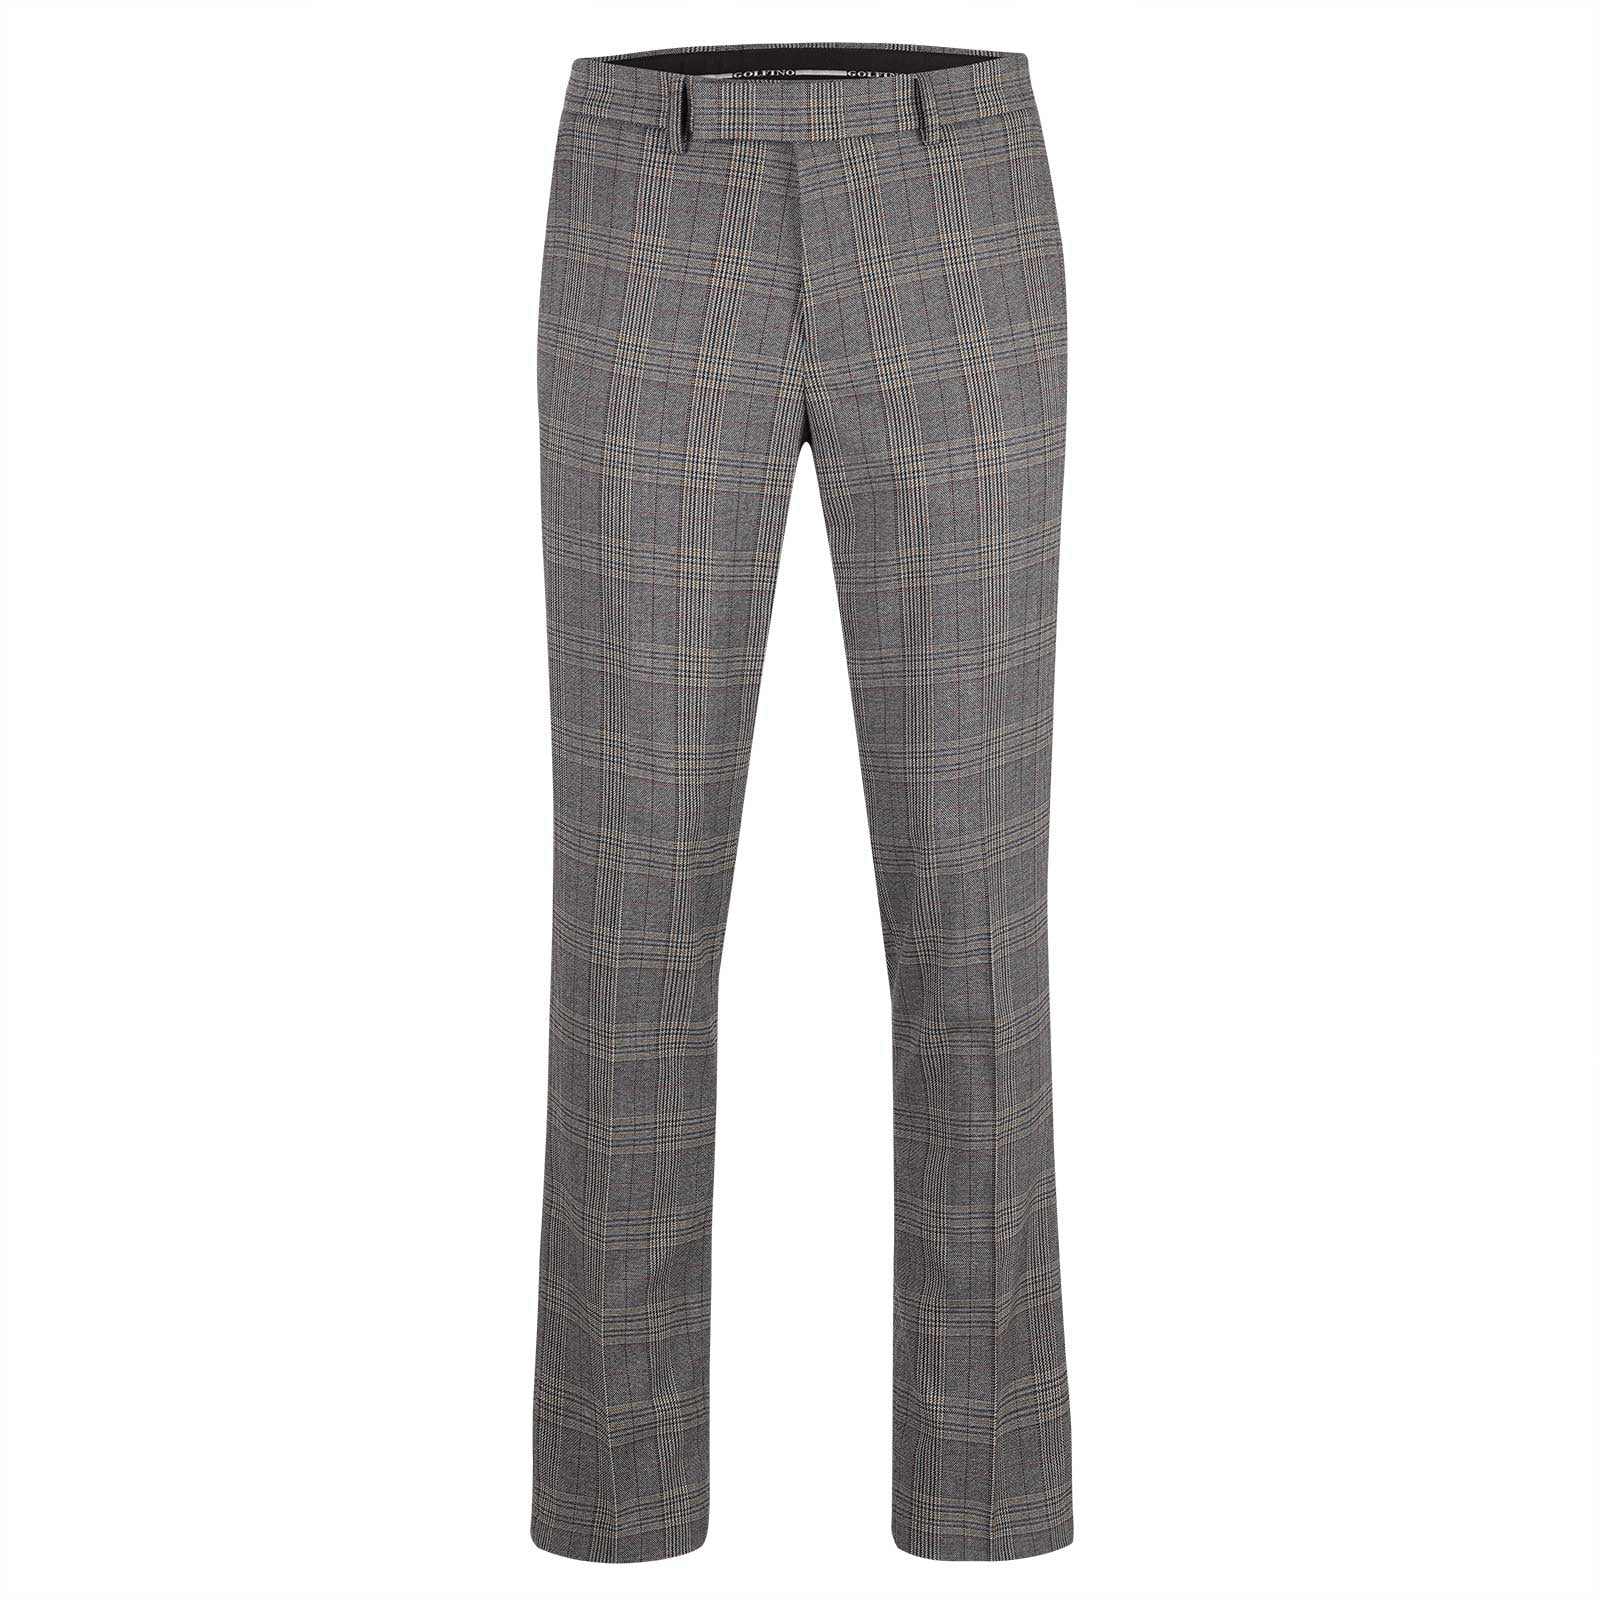 Galvin Green  Plaid Checked Ned Golf Trousers  Spring 2019